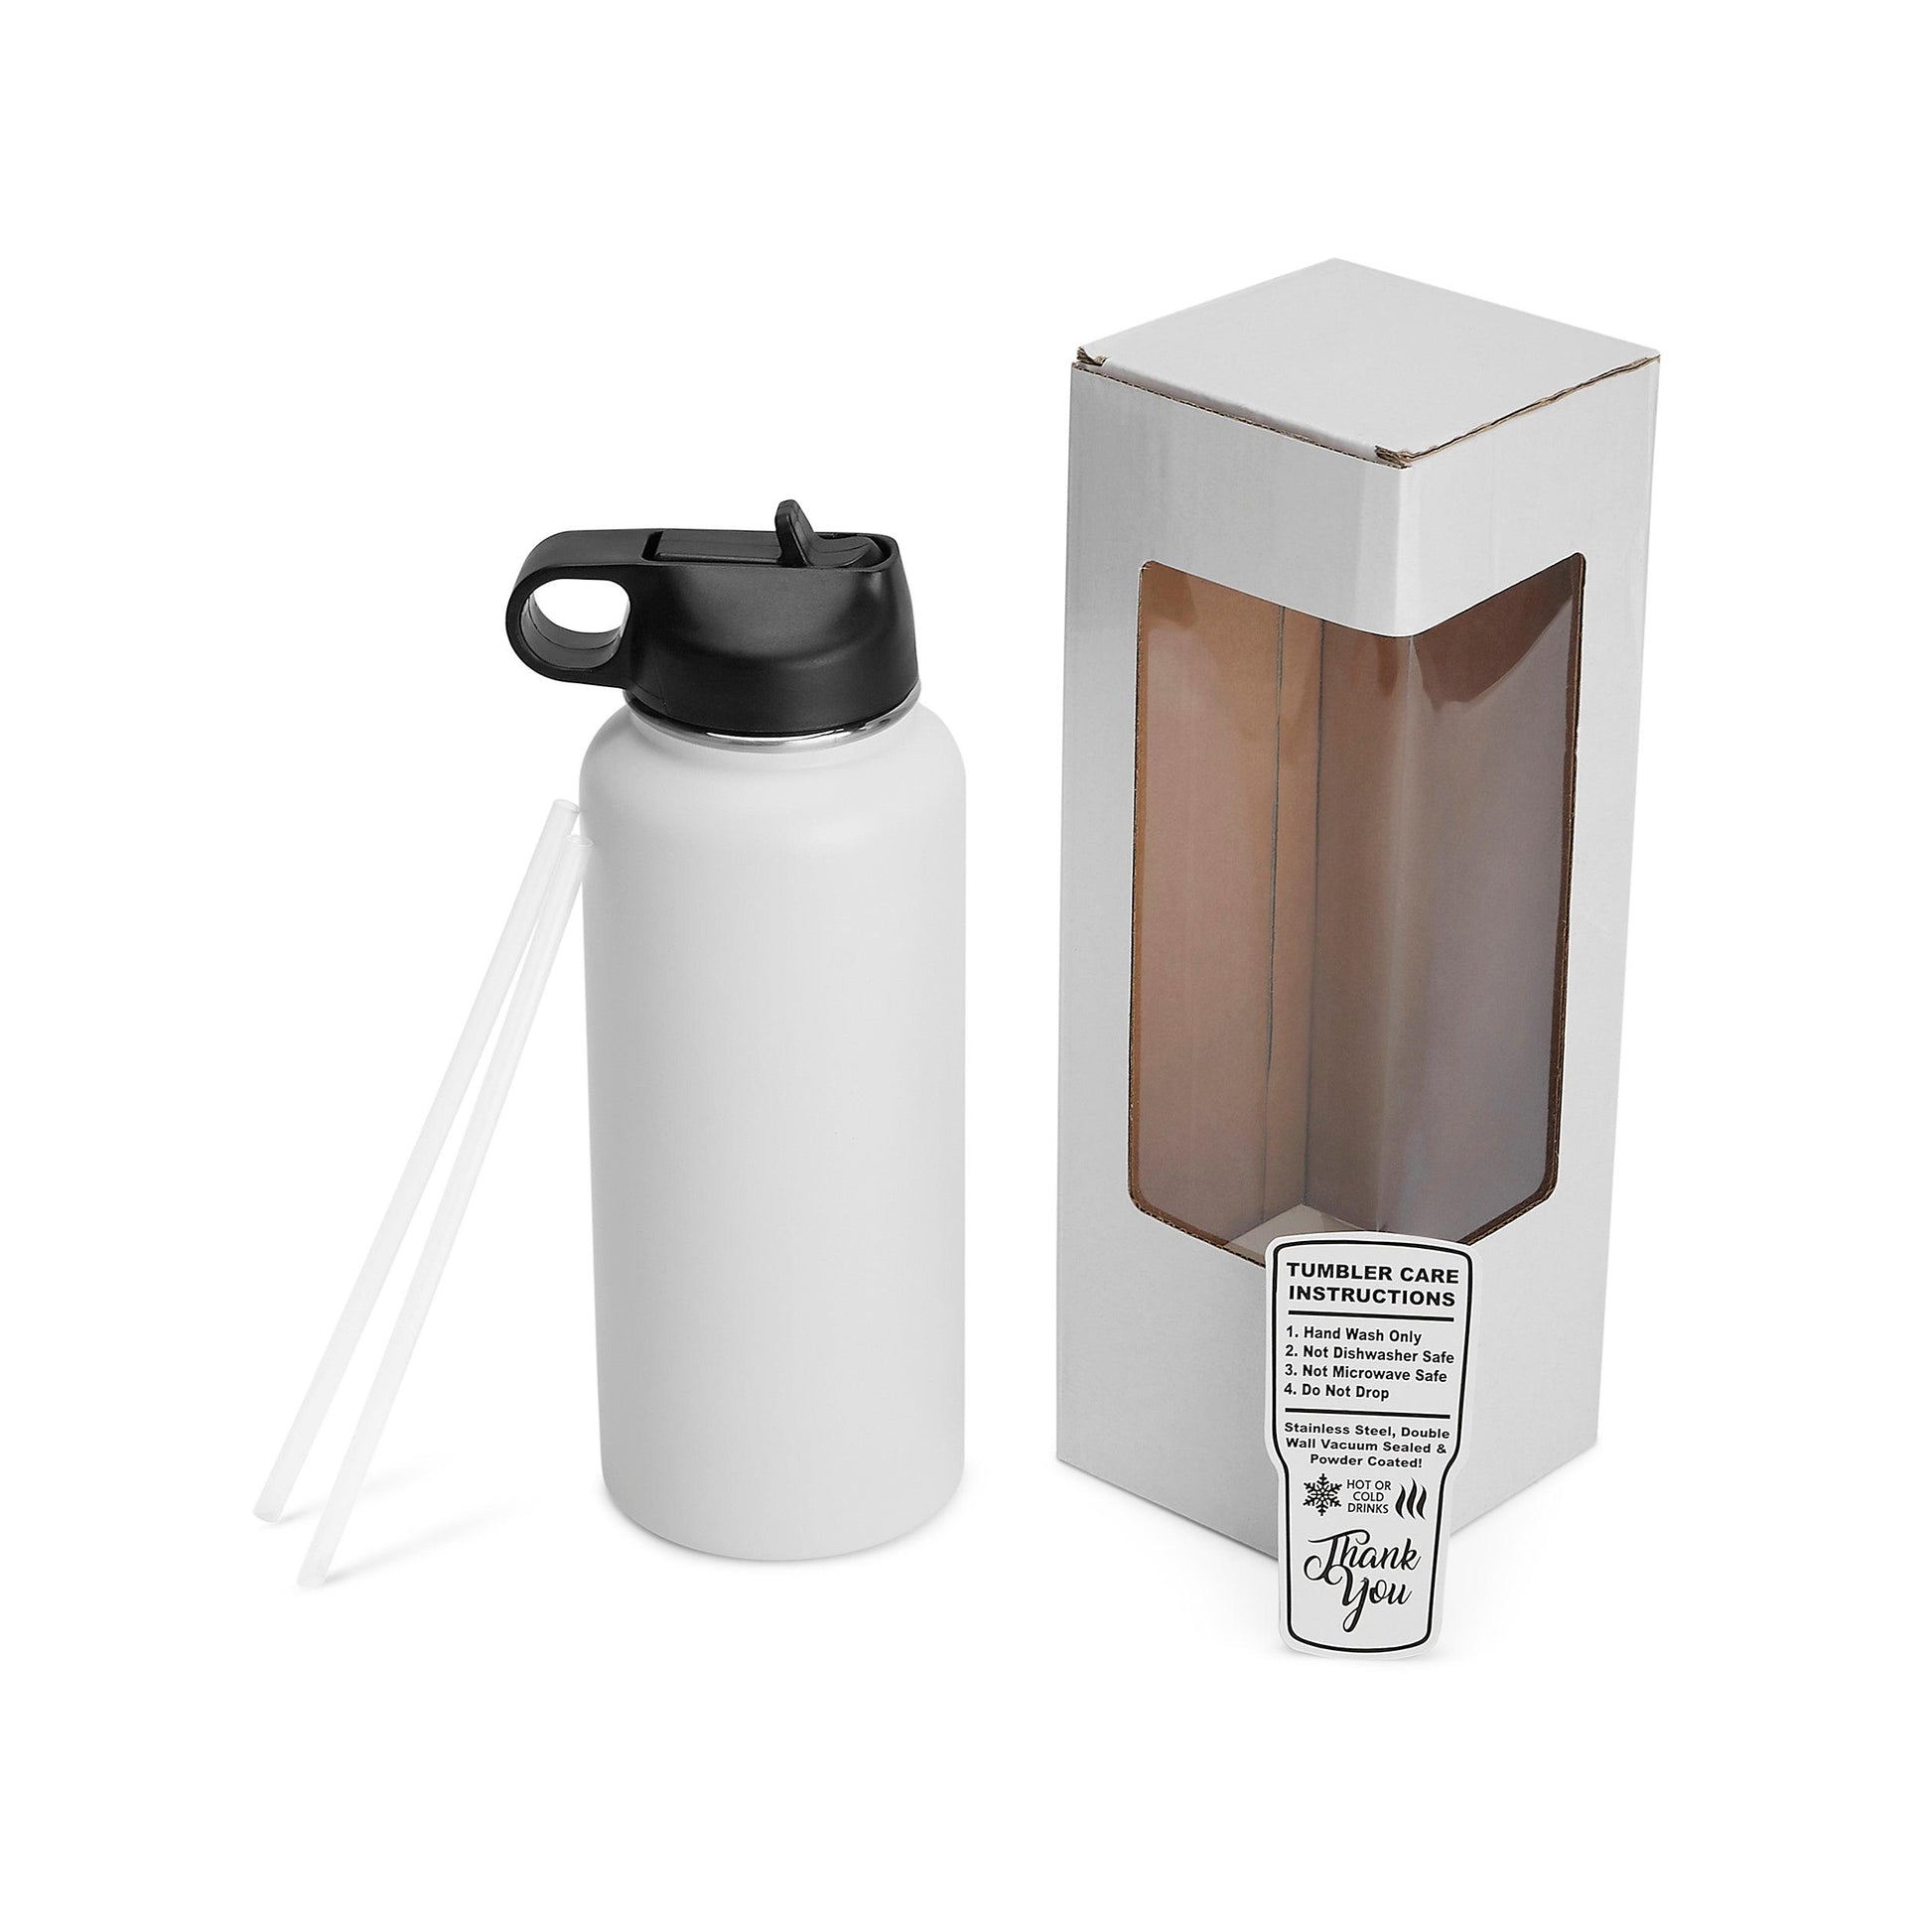 32 oz Stainless Steel Powder Coated Blank Insulated Sport Water